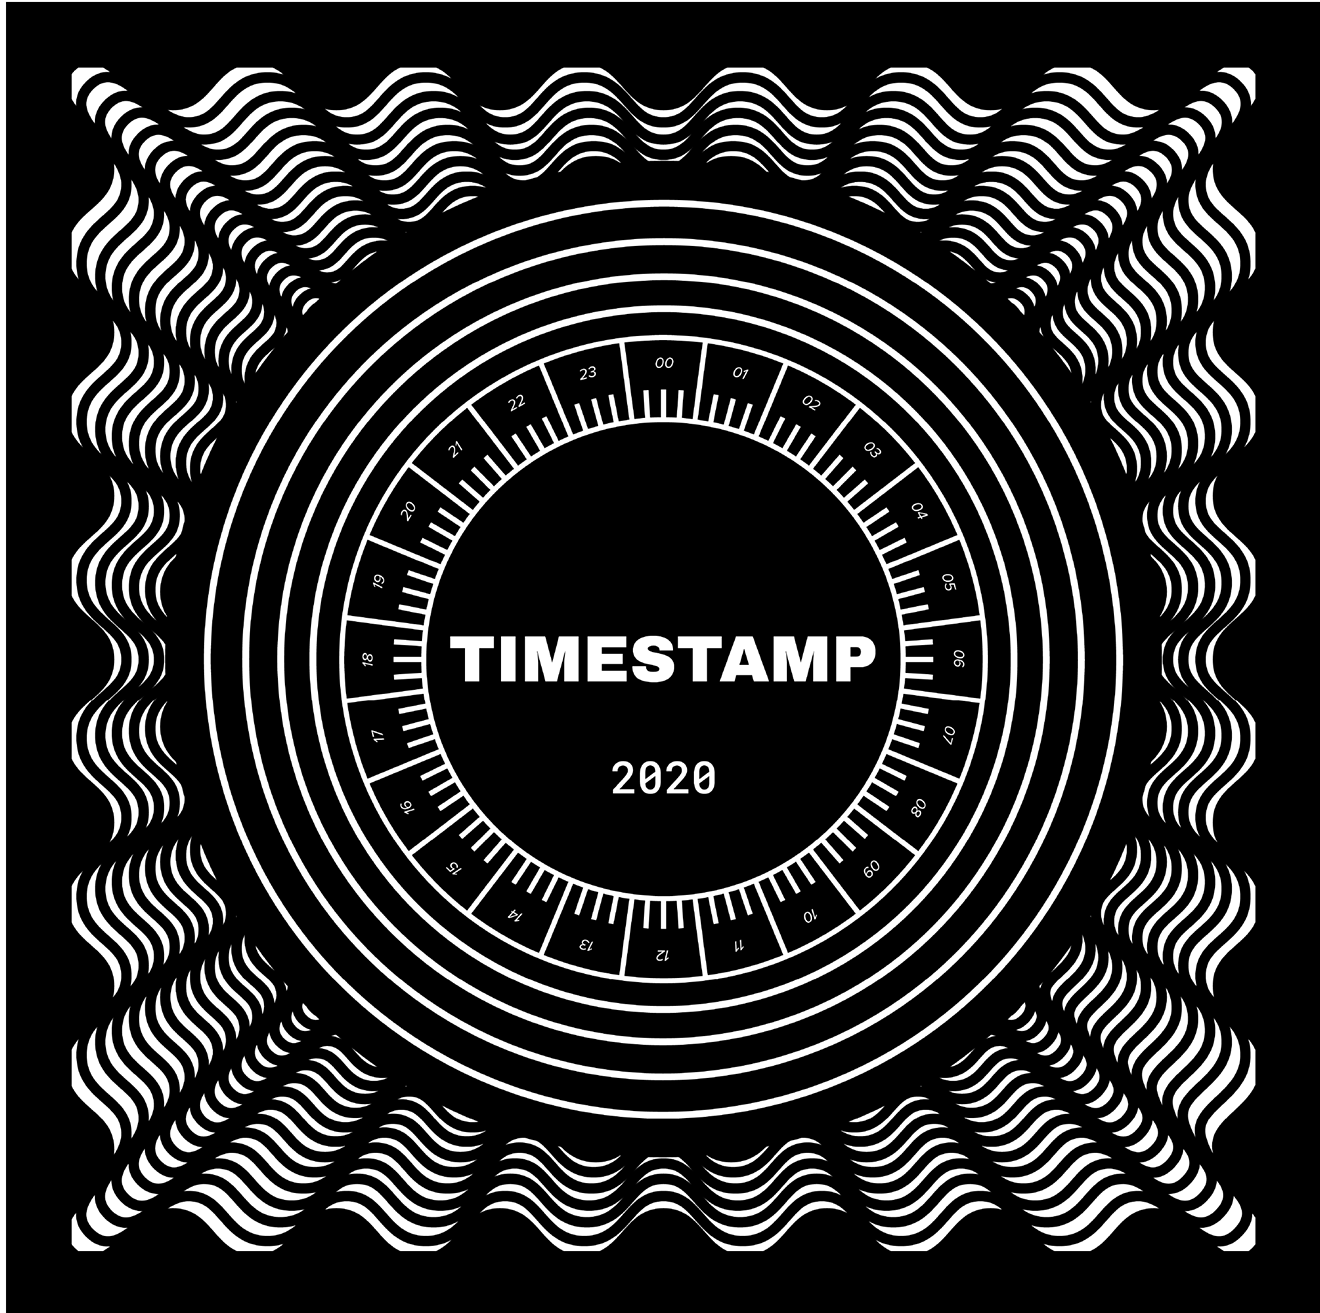 Timestamp will document music created during the pandemic.